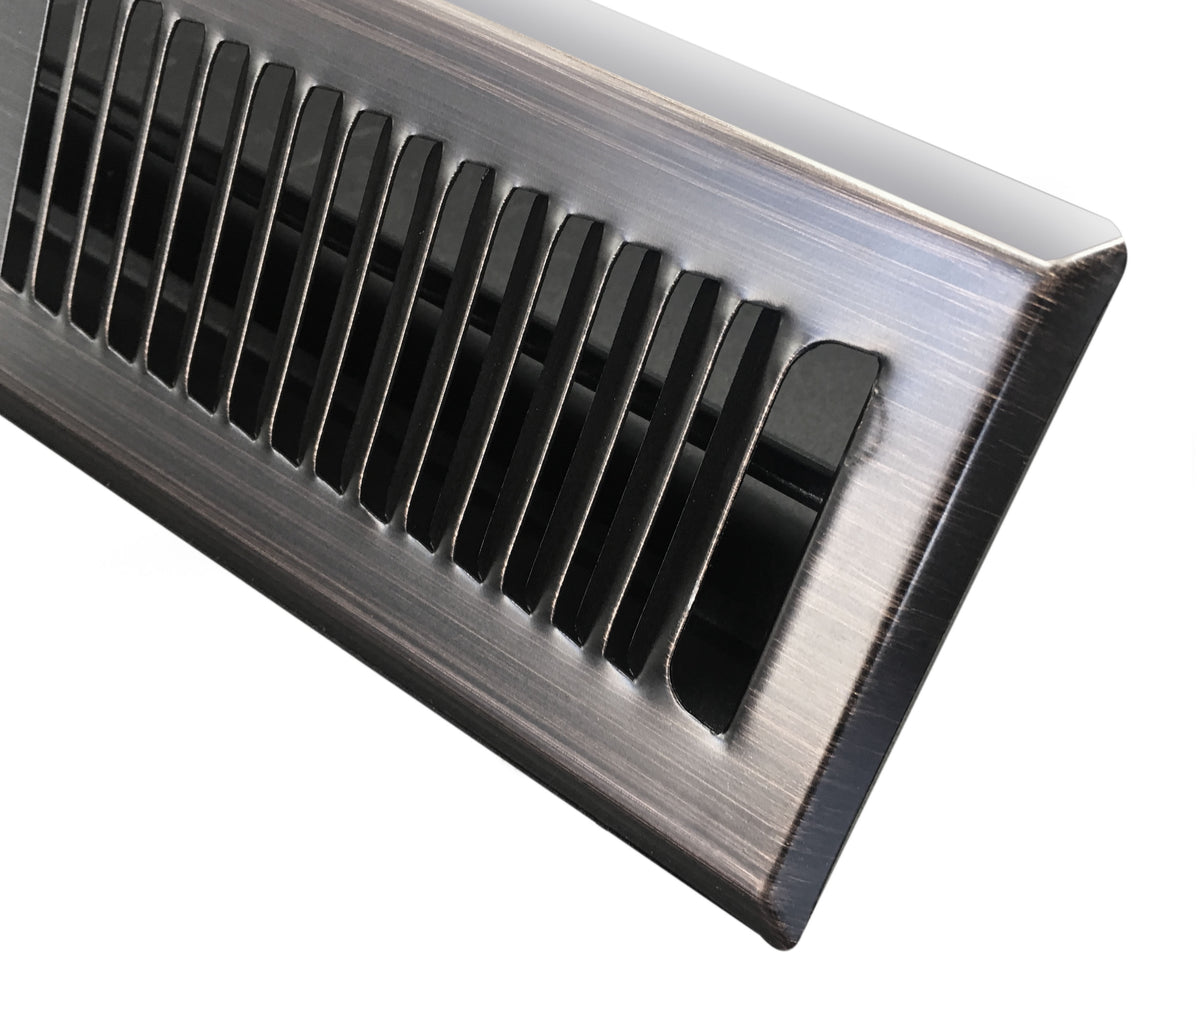 4&quot; X 14&quot; Modern Floor Register Grille With Dampers - Contempo Slotted Grate - HVAC Vent Duct Cover - Matte Black